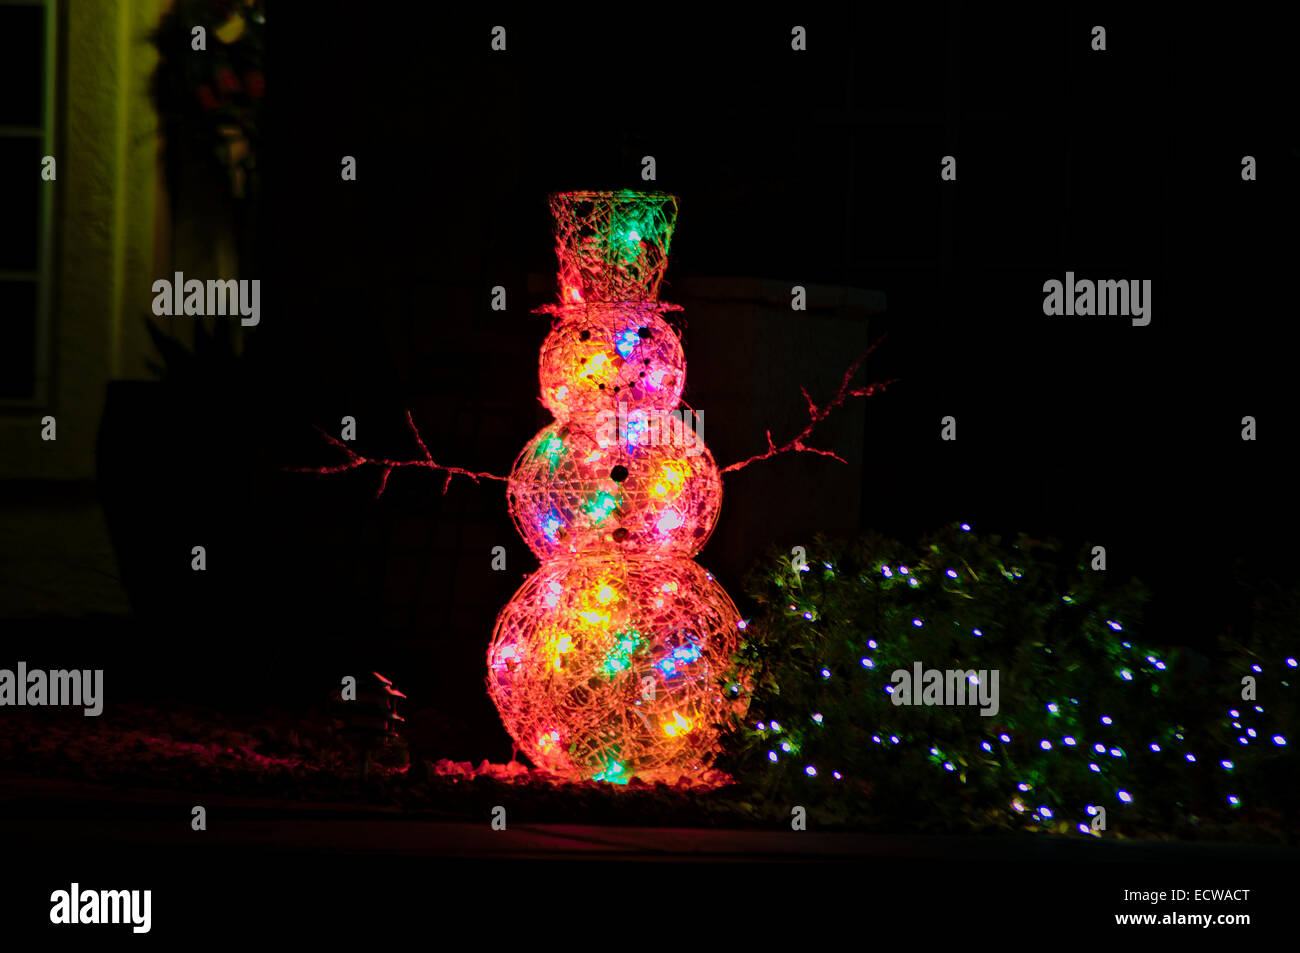 Frosty the Snowman made of various colored lights on display for Christmas. Stock Photo